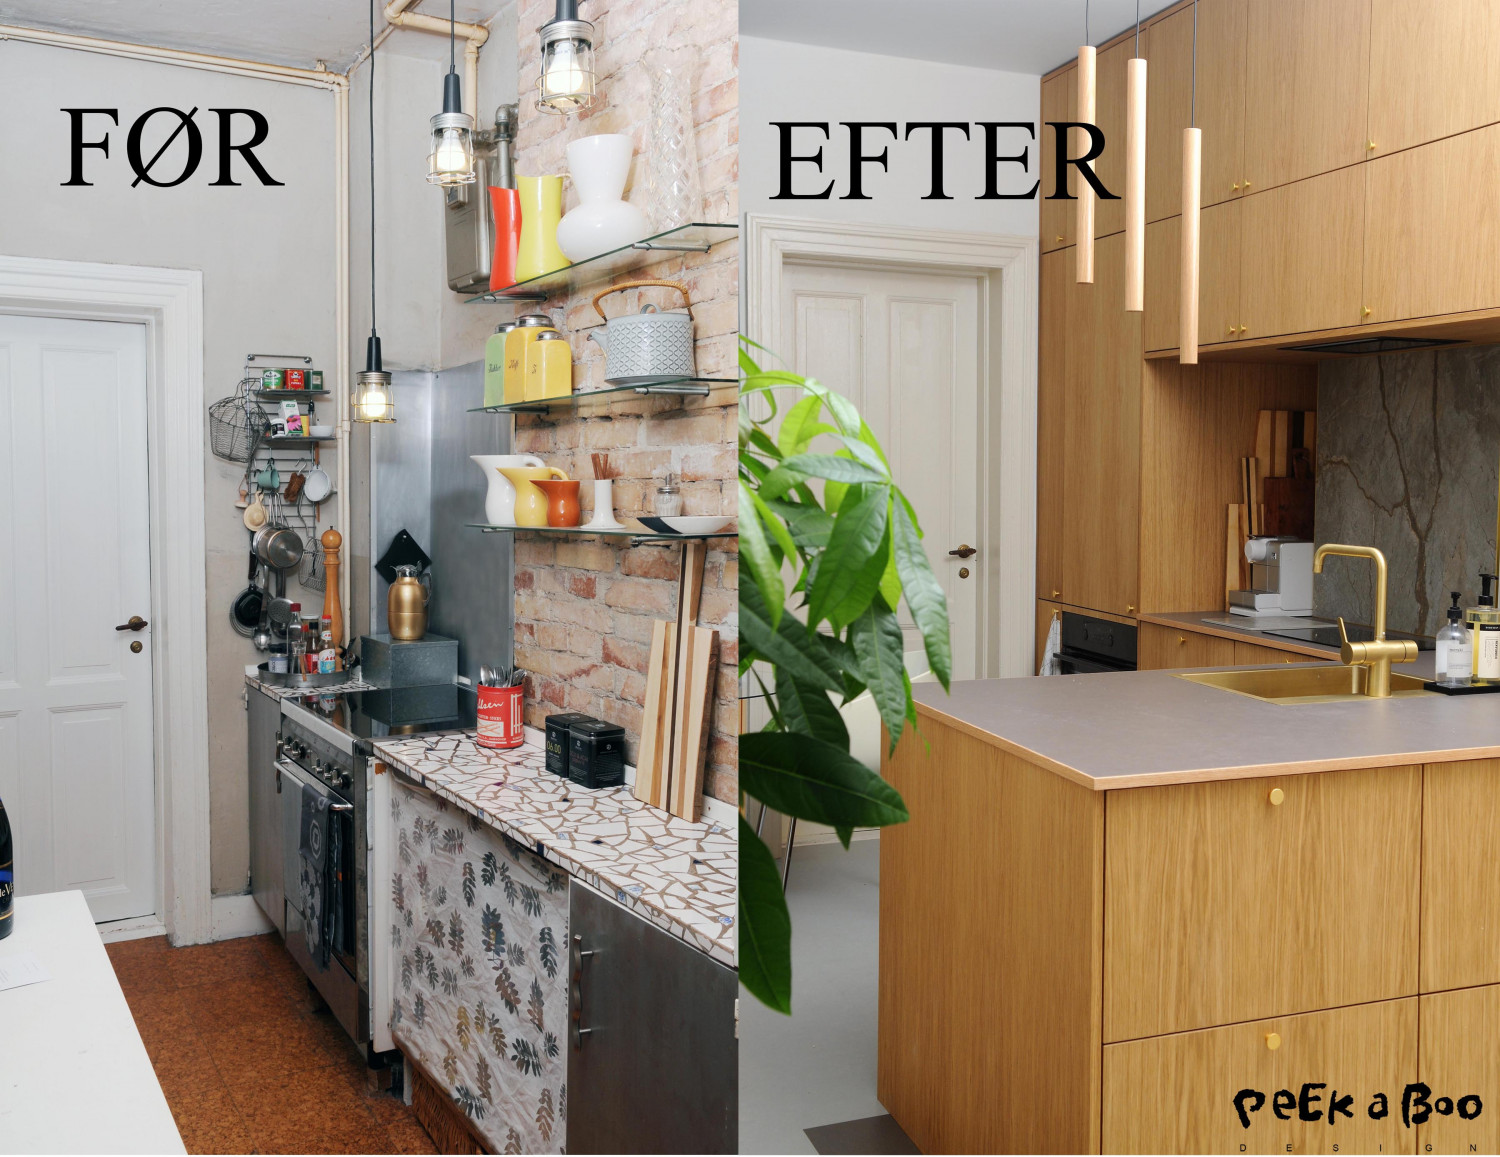 before and after kitchen renovation.